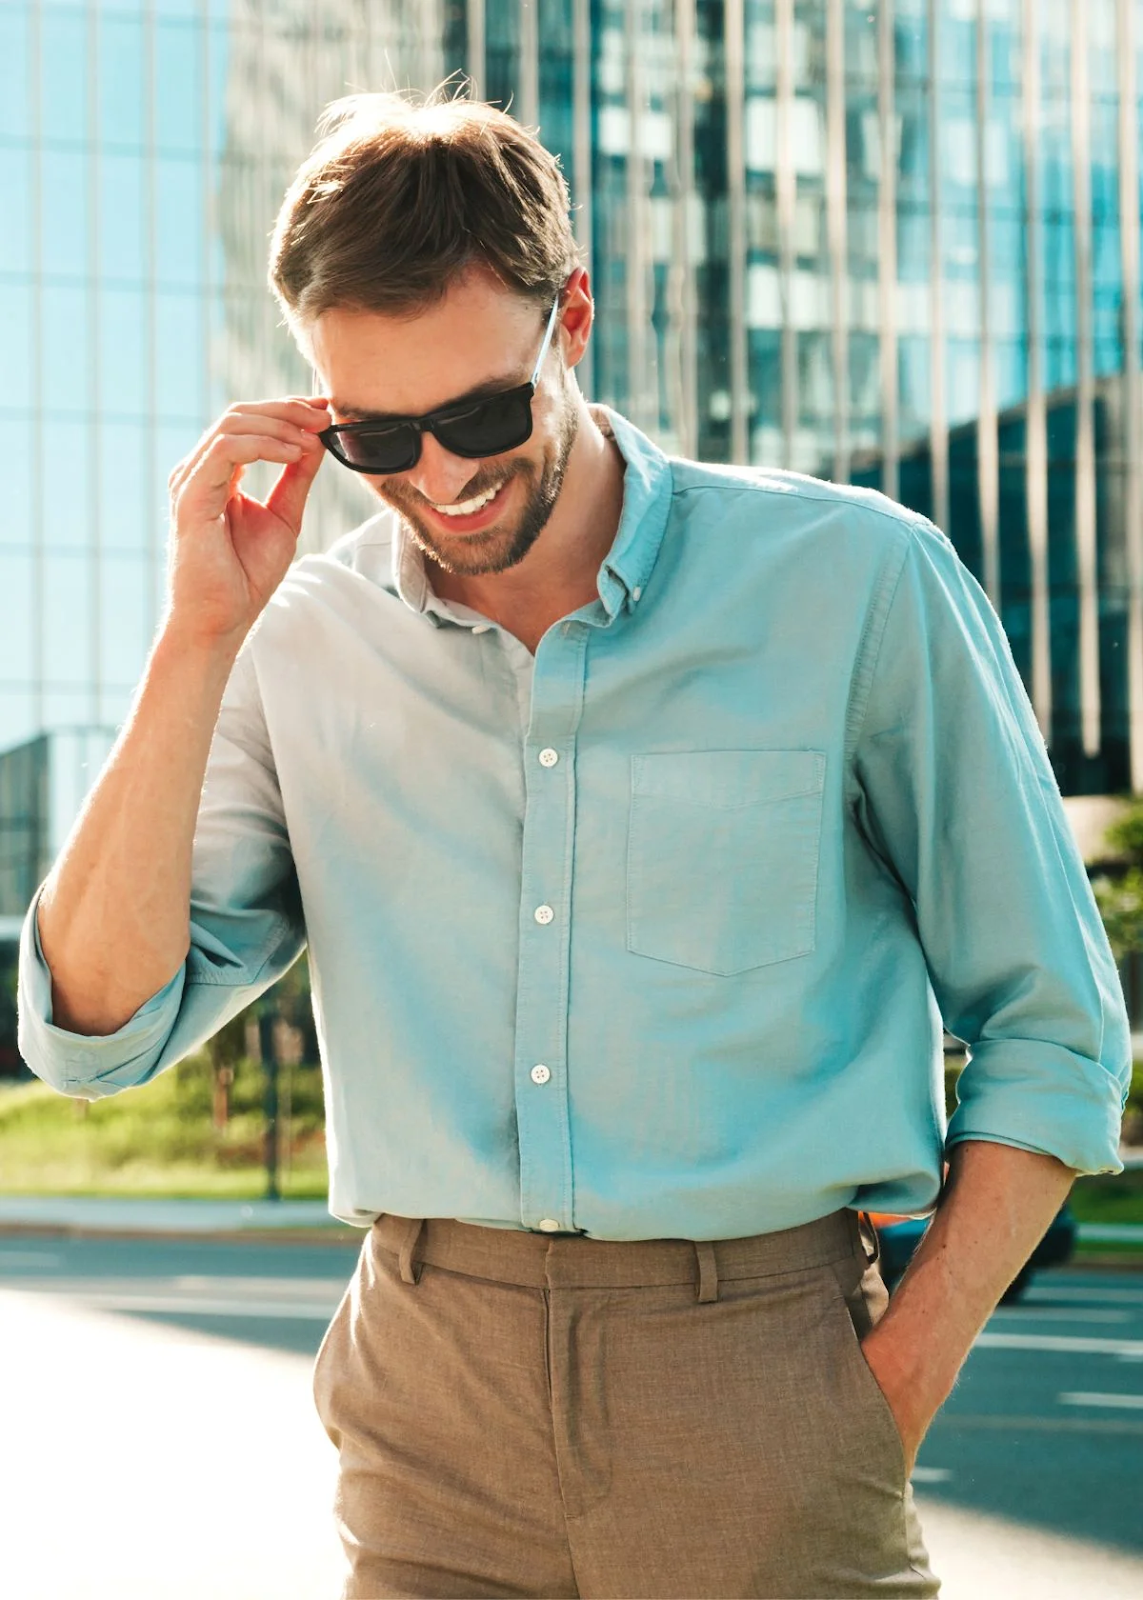 Strike A Pose With Confidence Best Sunglasses For Men To Showcase Their Suave Sophistication 